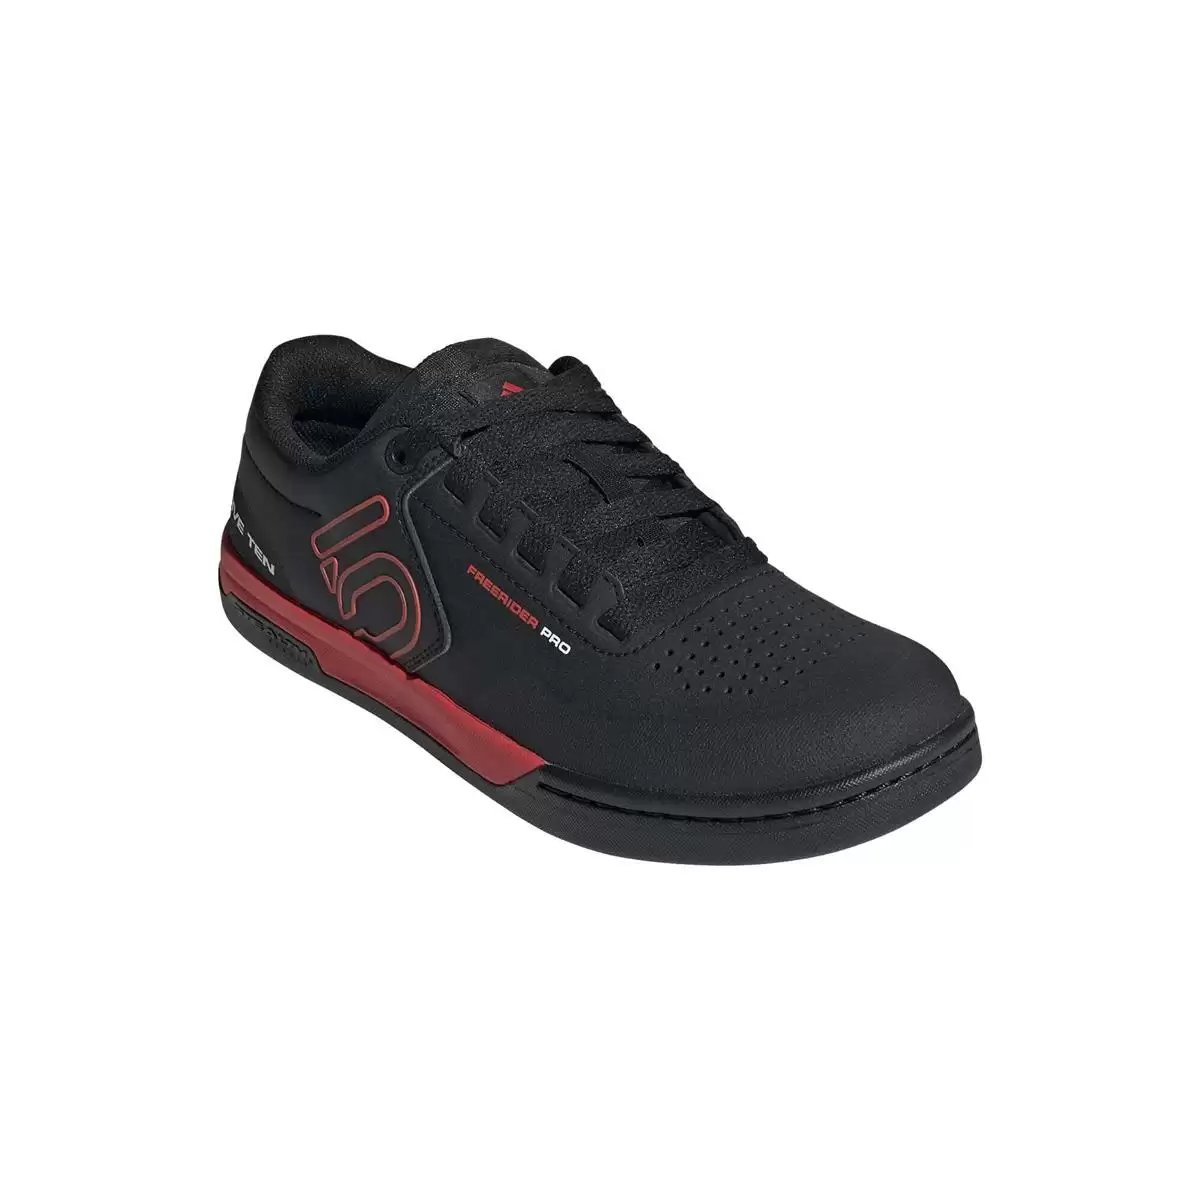 MTB Flat Shoes Freerider Pro Black/Red Size 44 #1